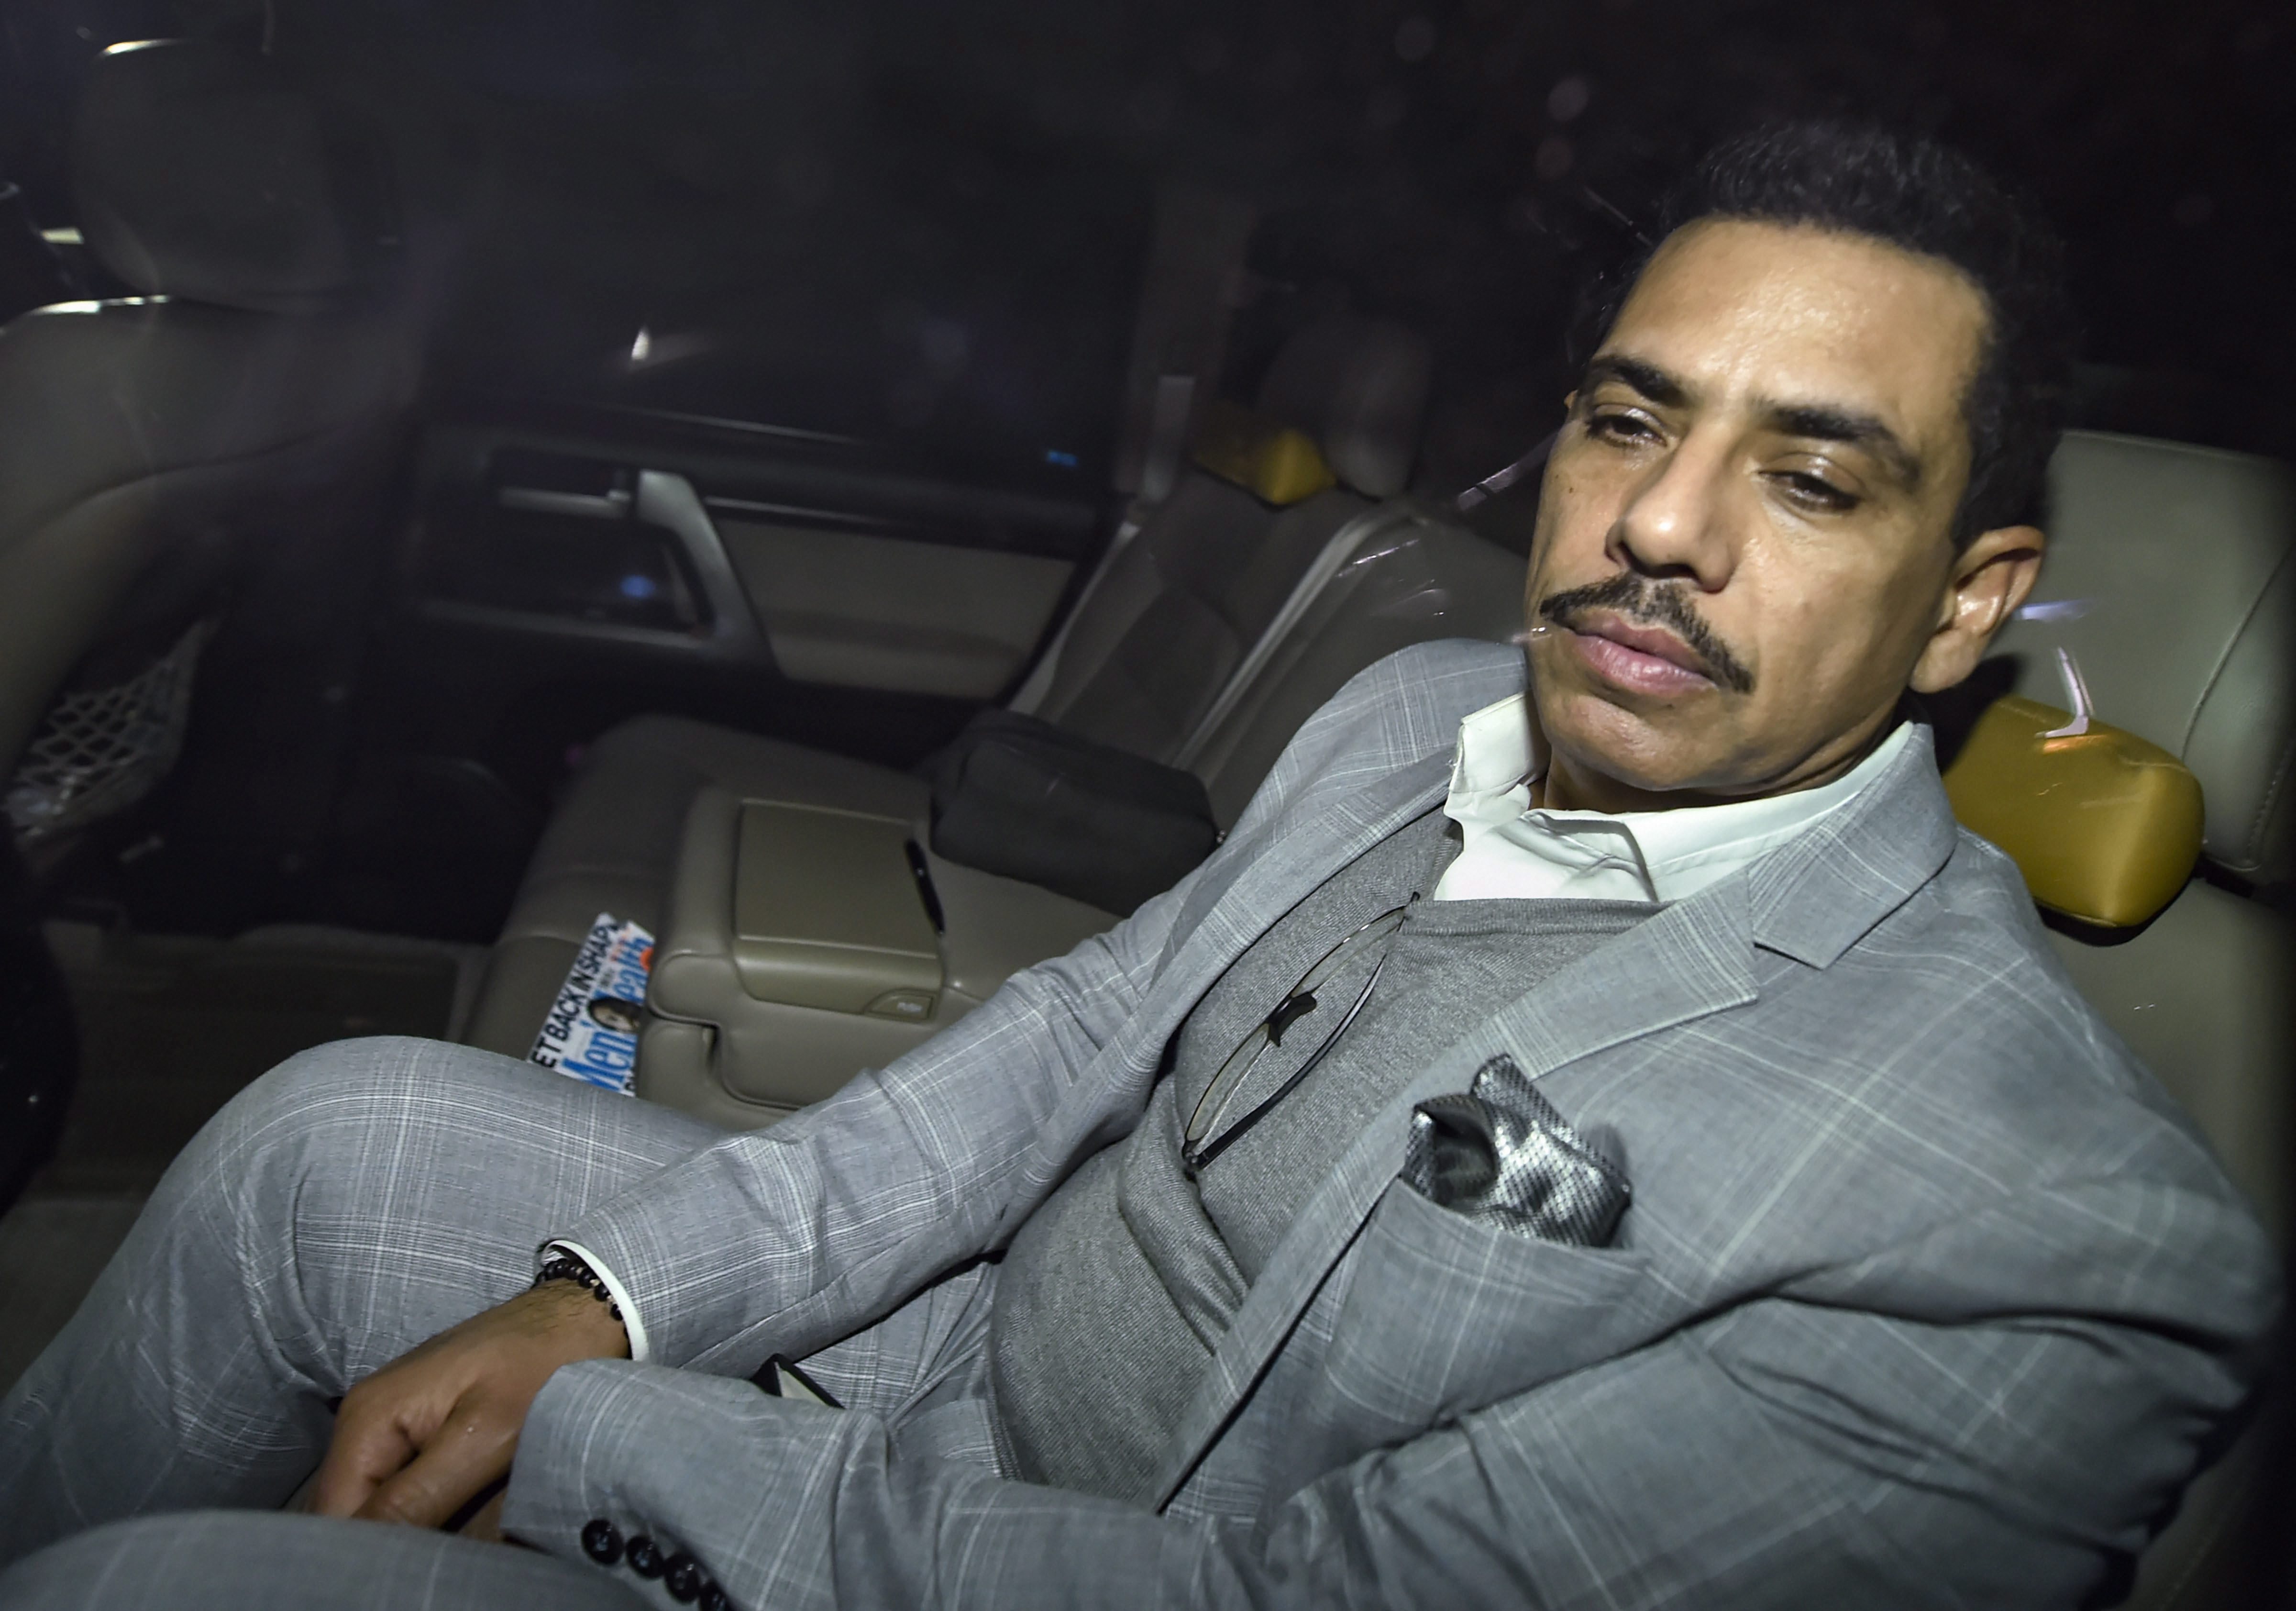 Robert Vadra leaves after appearing before the Enforcement Directorate in New Delhi on February 6.